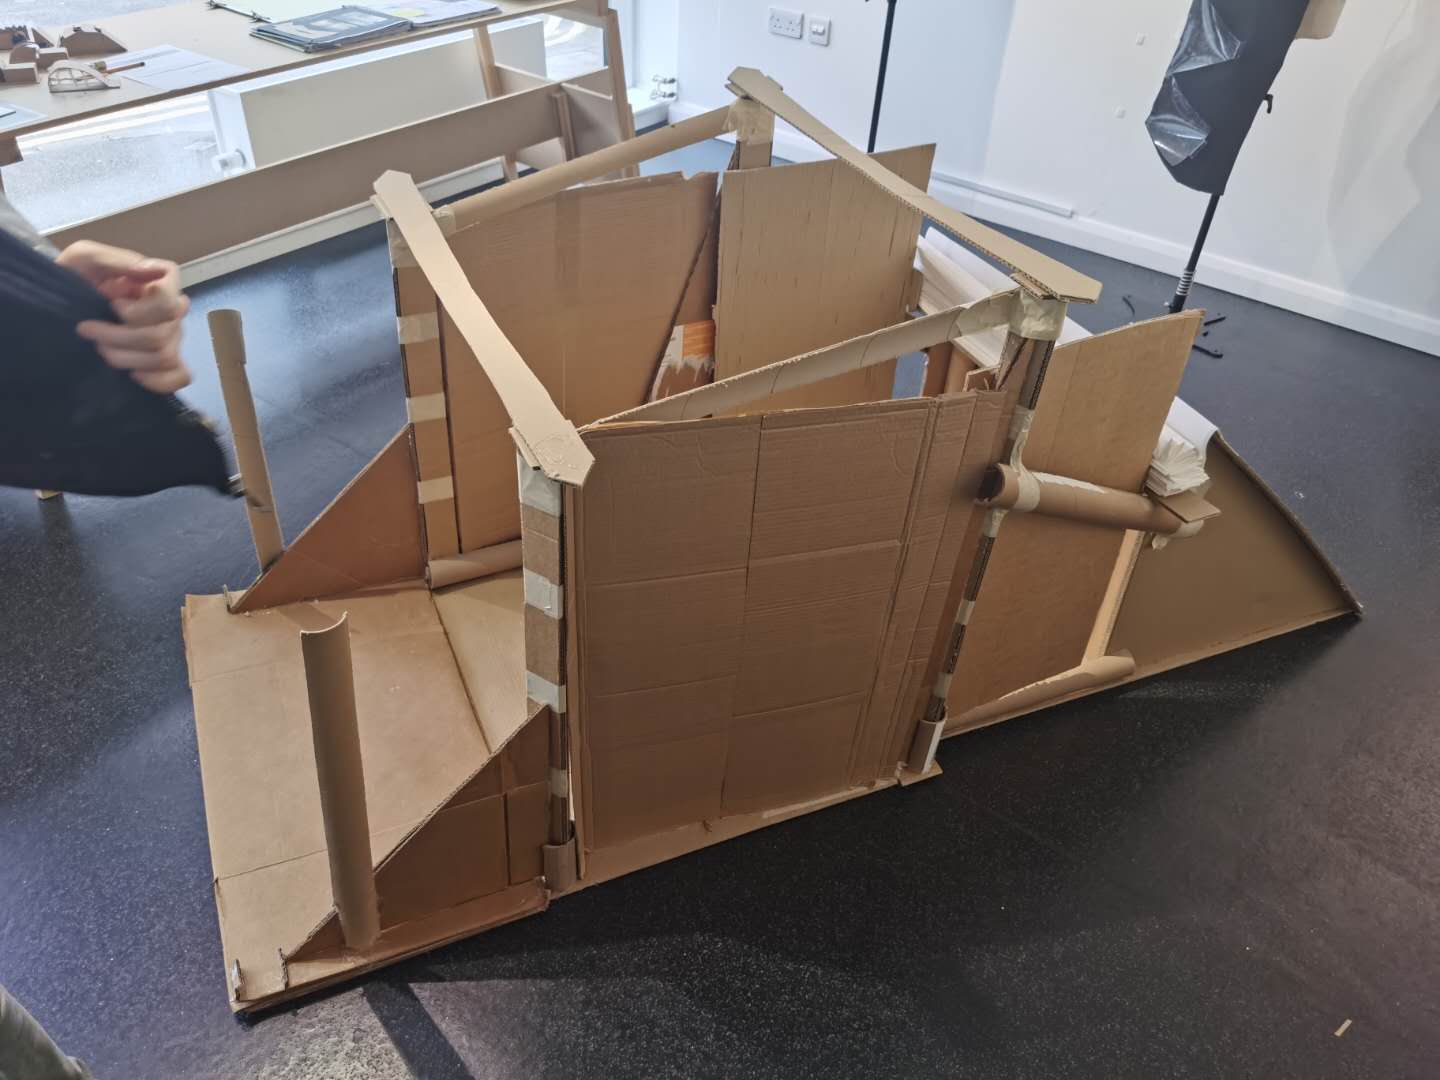 Photo of model made with cardboard